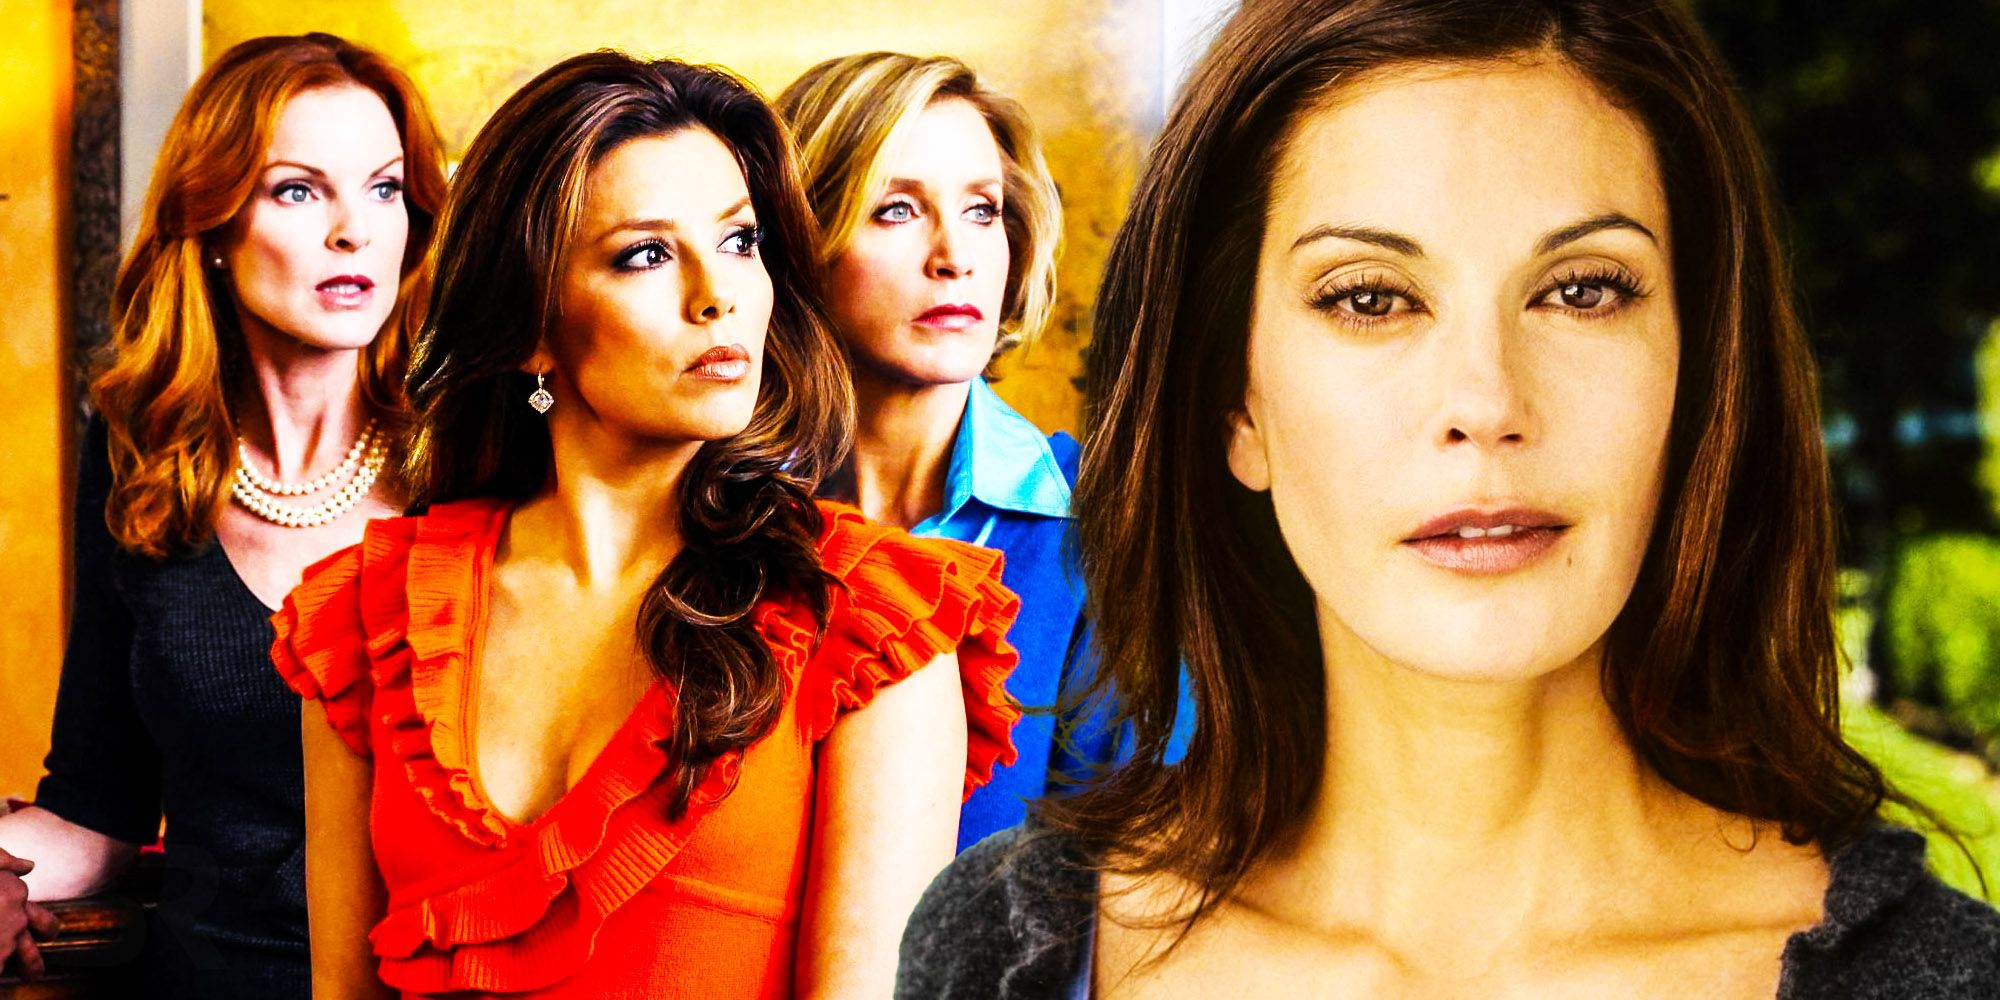 A blended image features Desperate Housewives characters Bree, Gaby, Lynette, and Susan